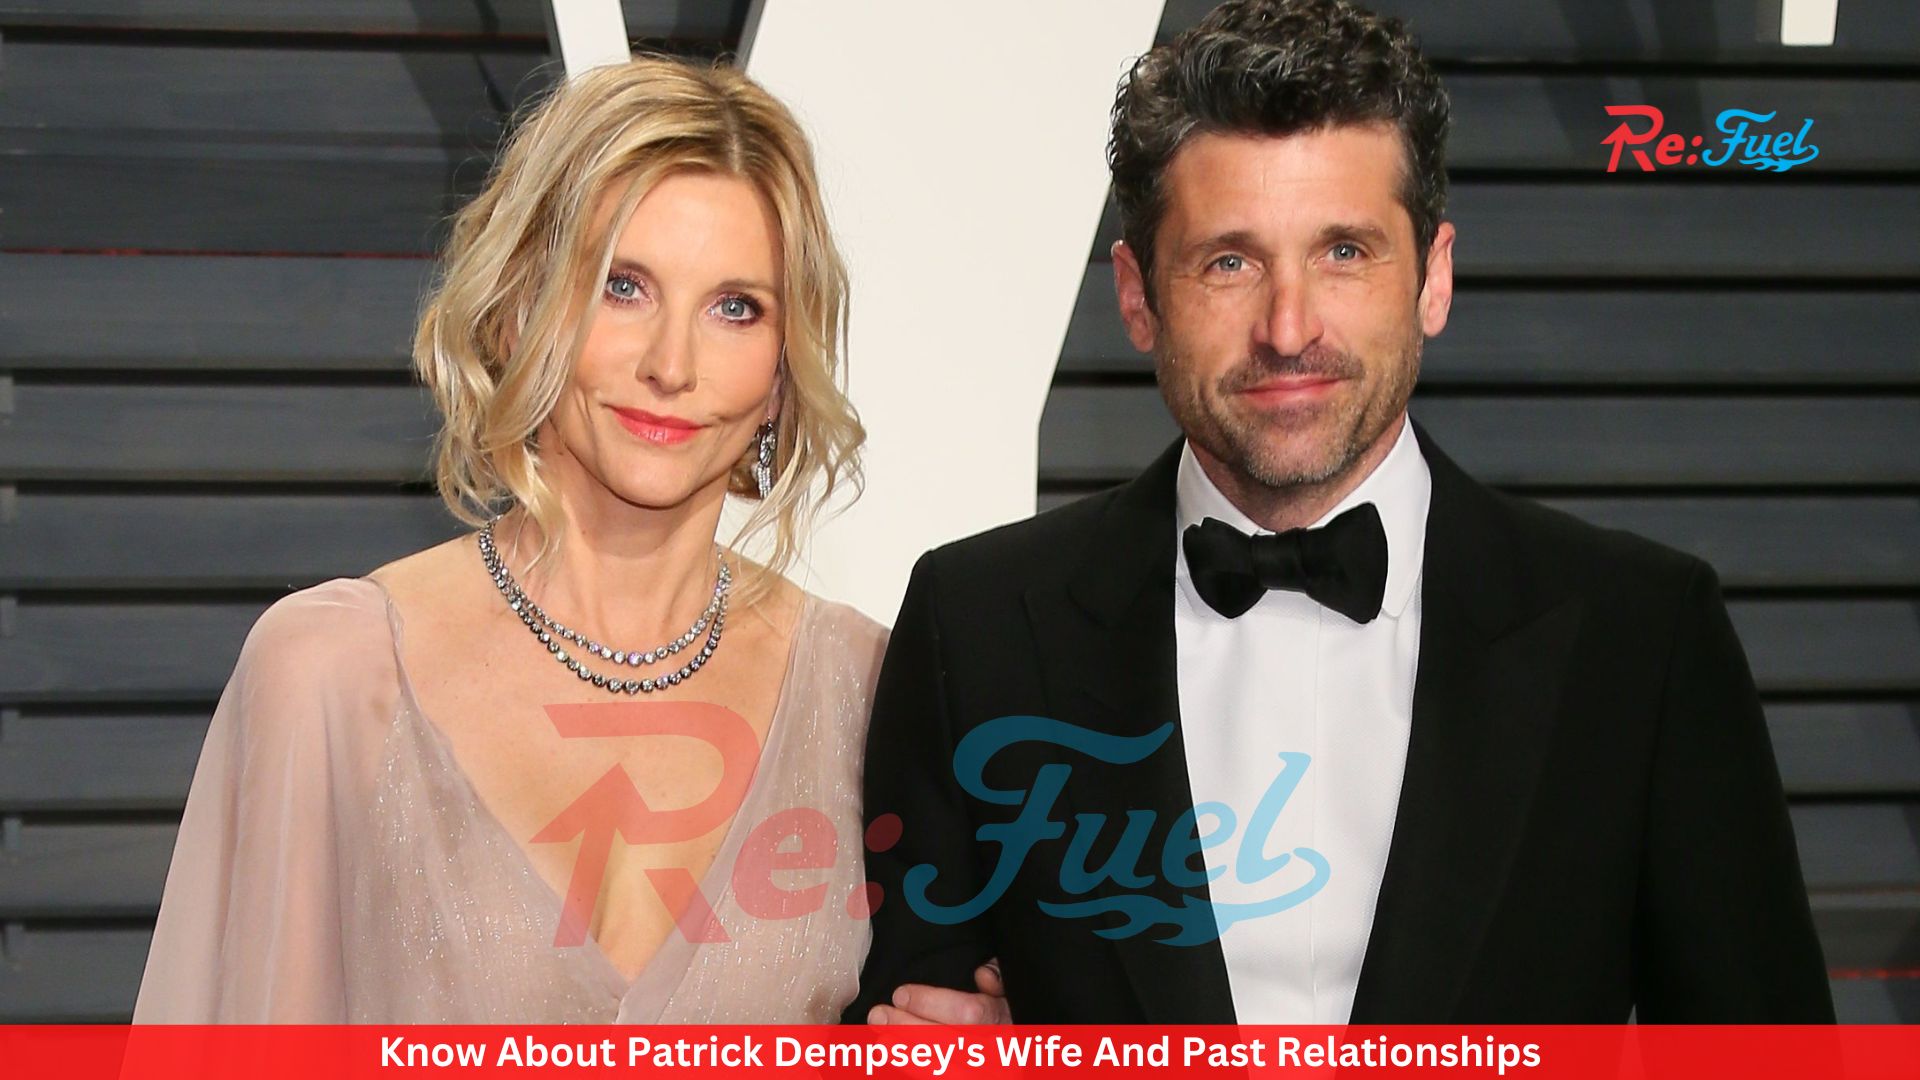 Know About Patrick Dempsey's Wife And Past Relationships